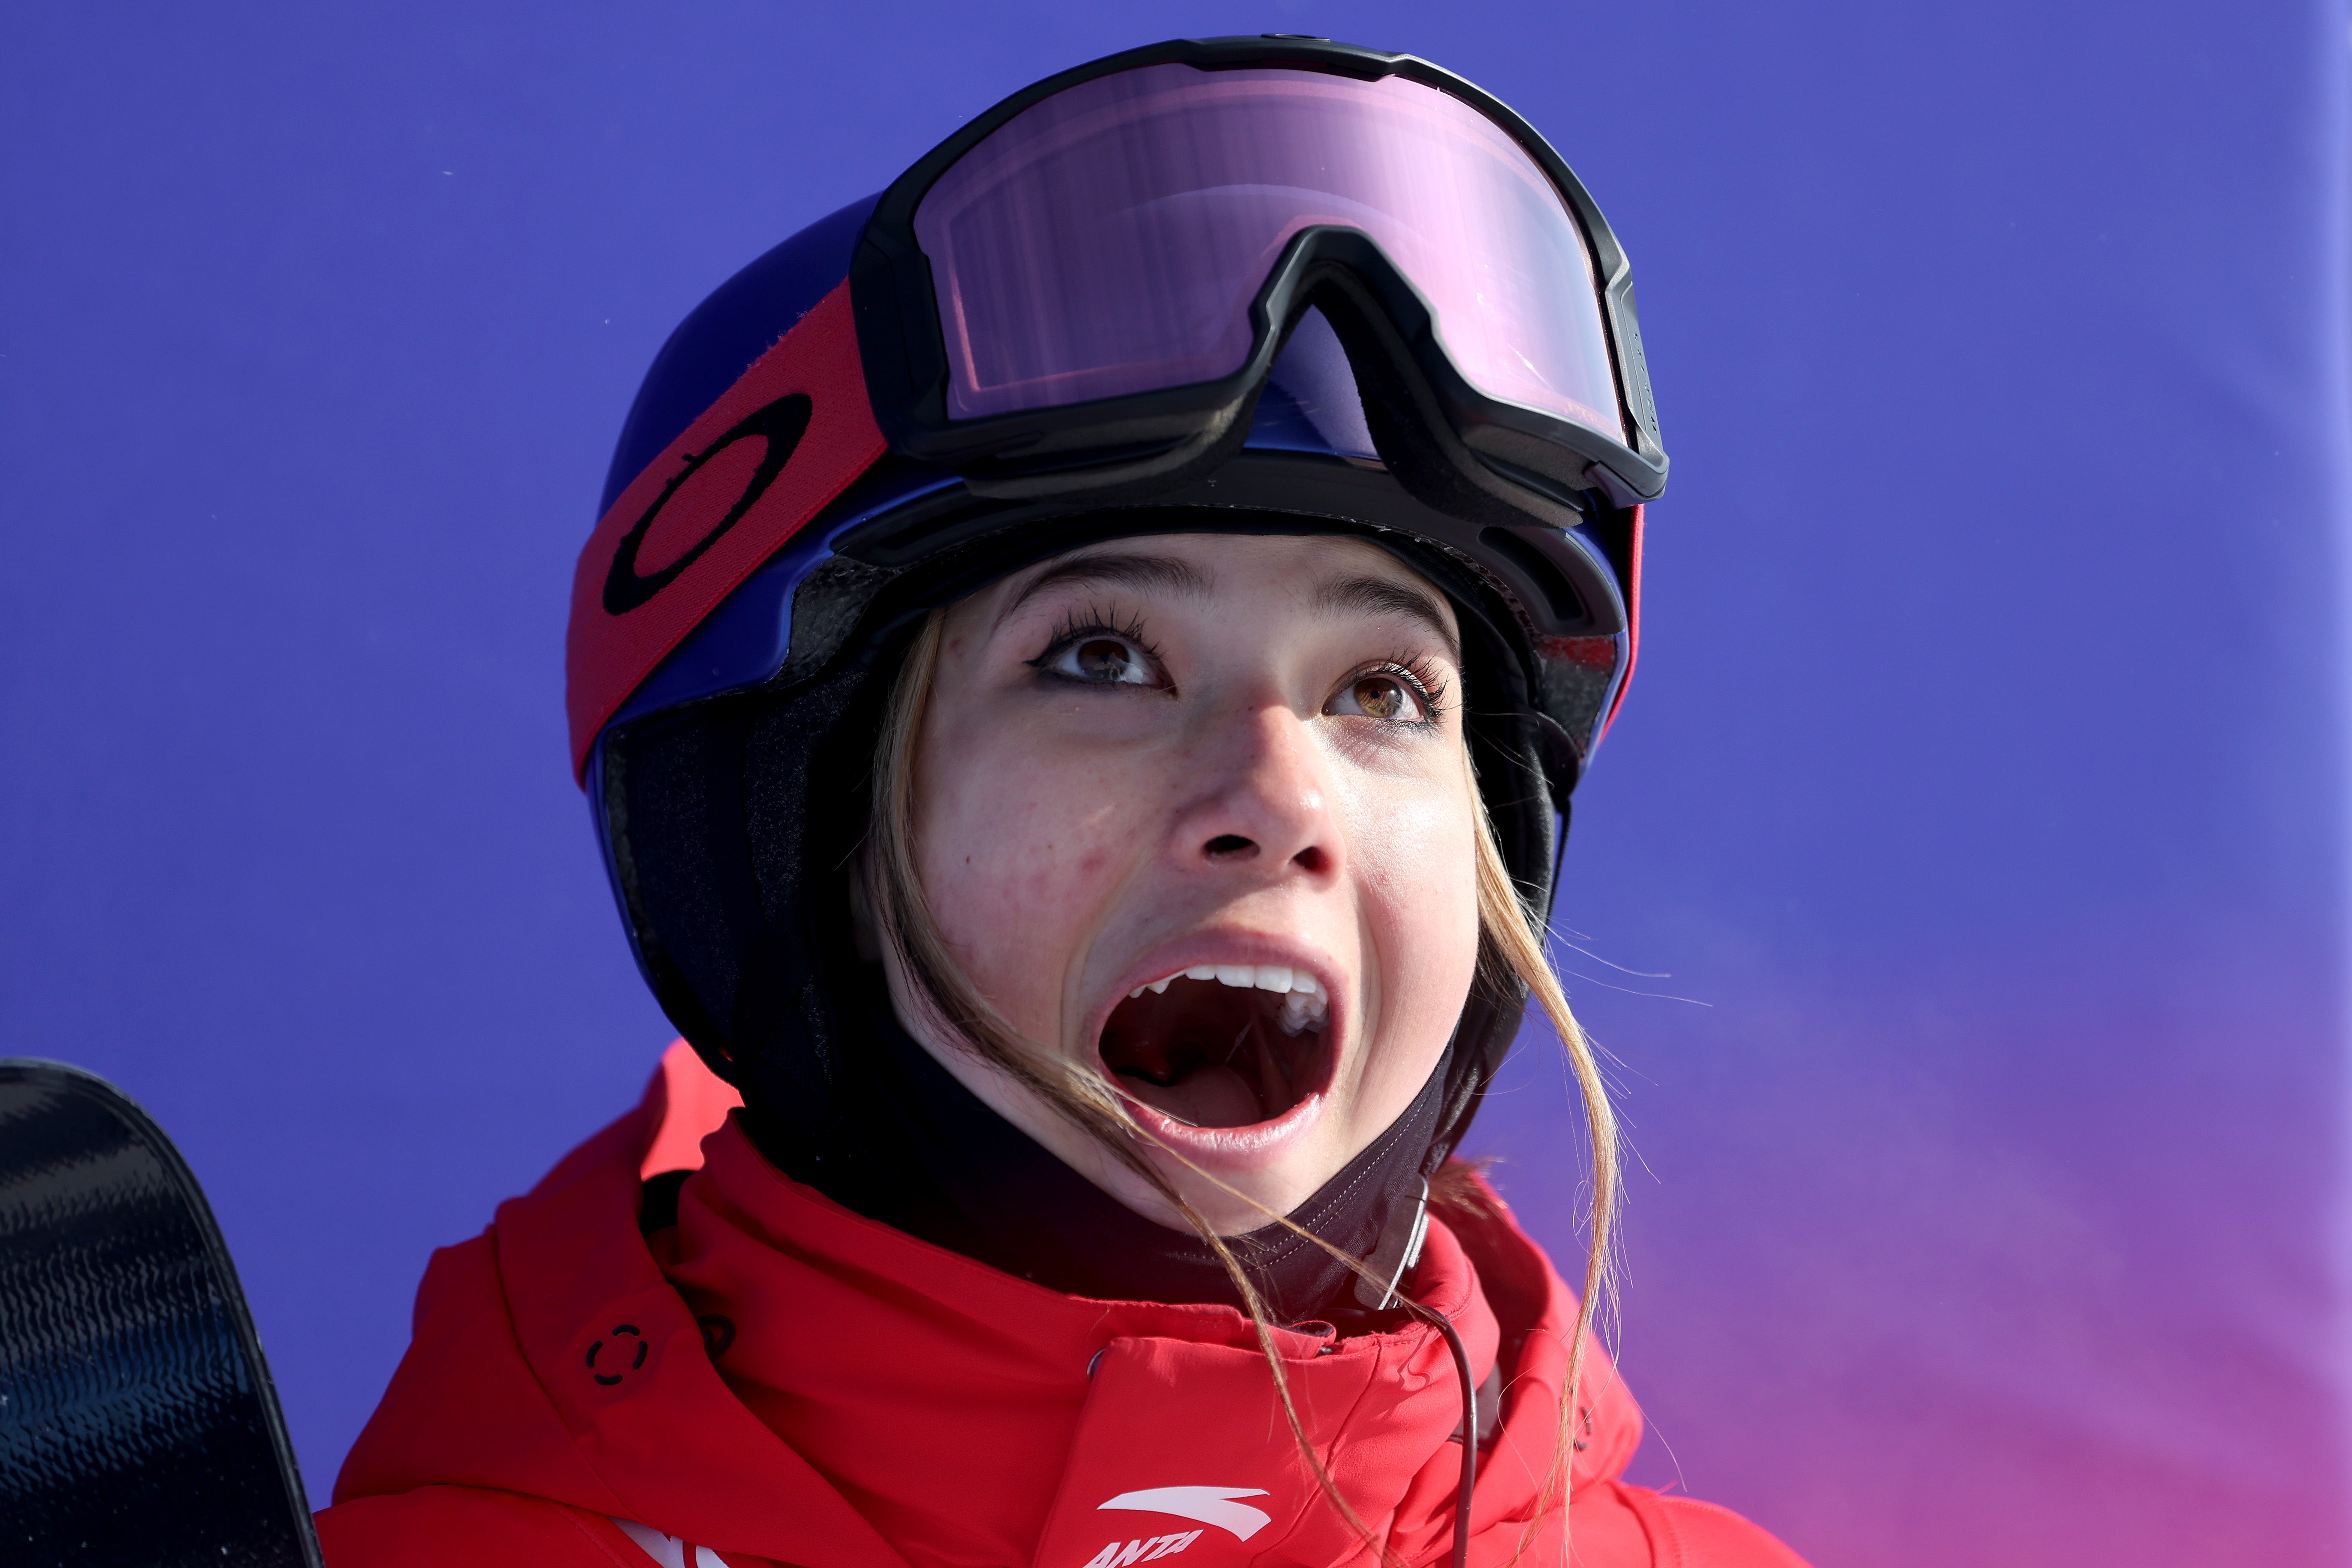 Ailing Eileen Gu of Team China reacts after their second run during the Women's Freestyle Freeski Halfpipe Final on Day 14